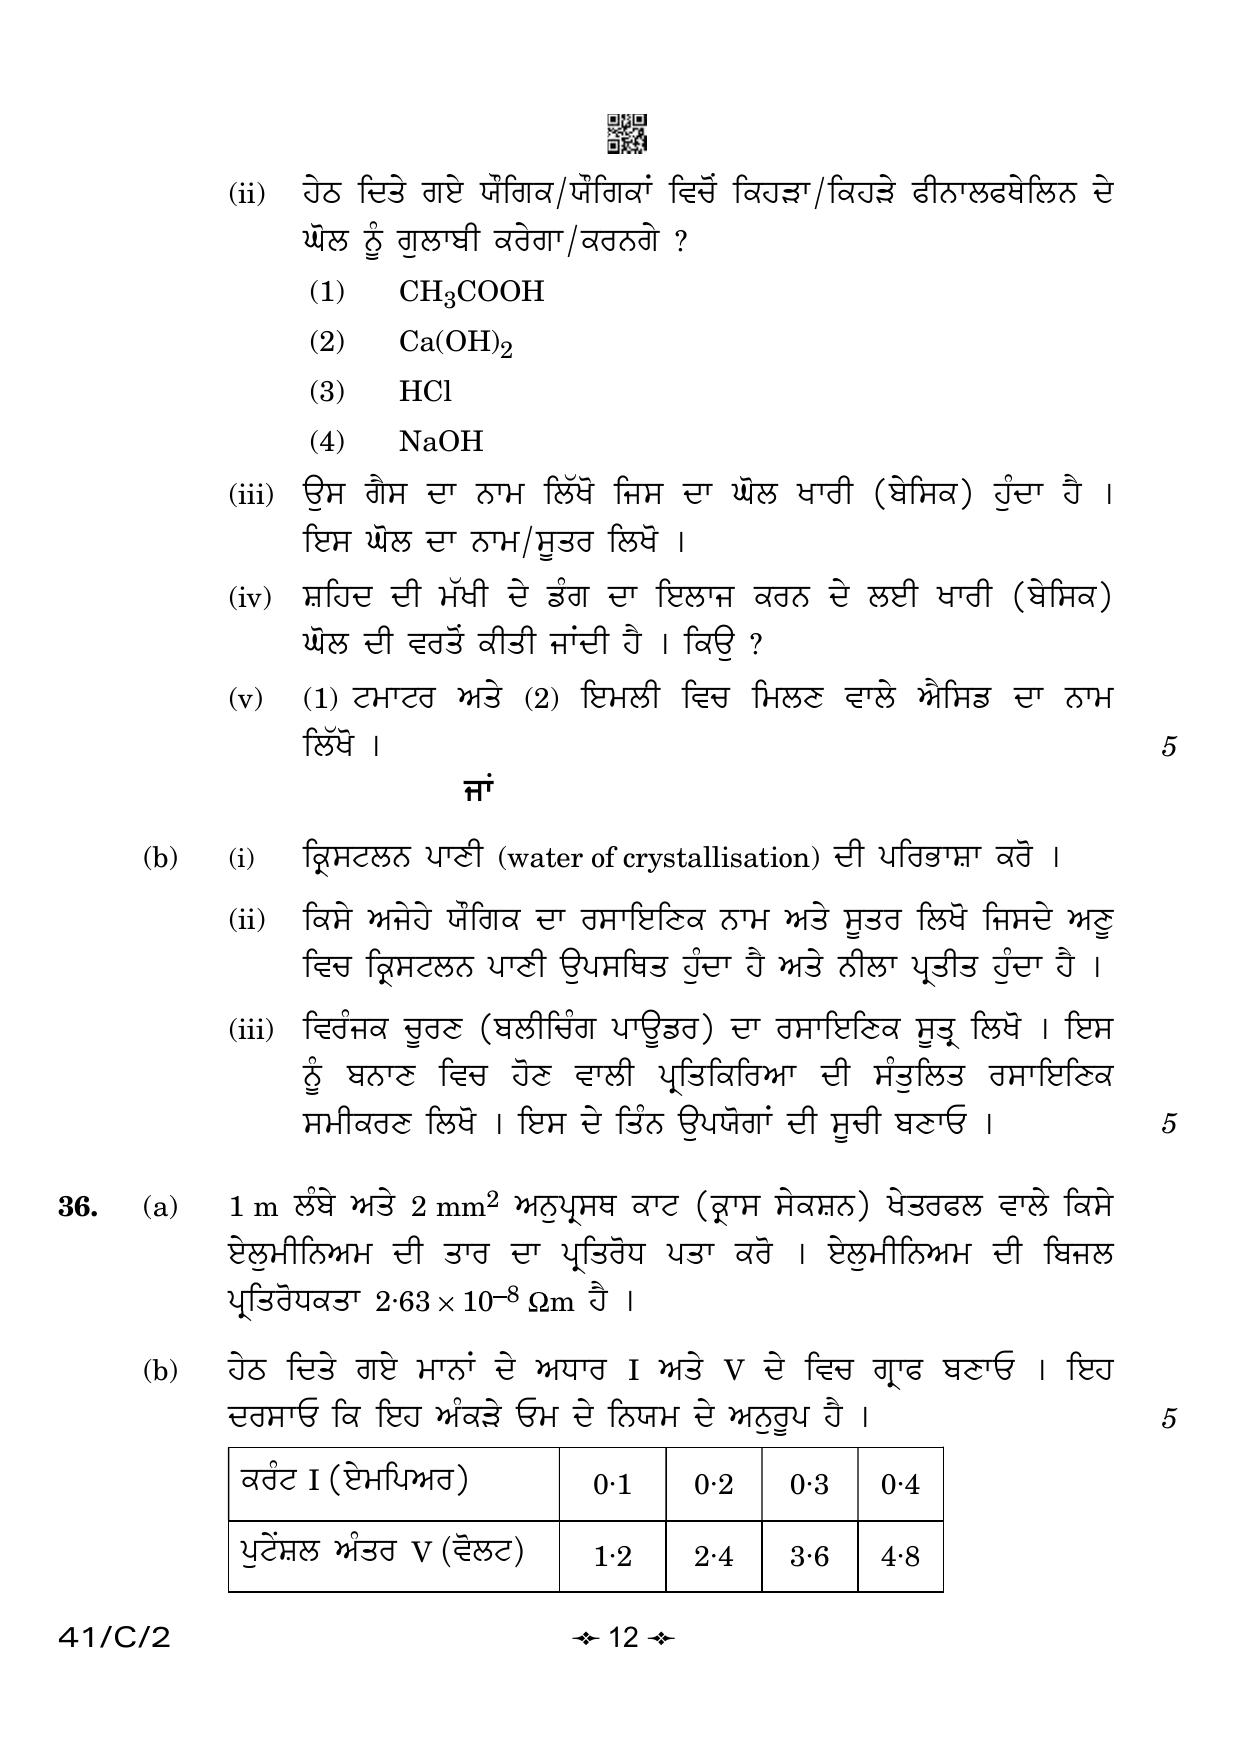 CBSE Class 10 41-2 Science Punjabi 2023 (Compartment) Question Paper - Page 12